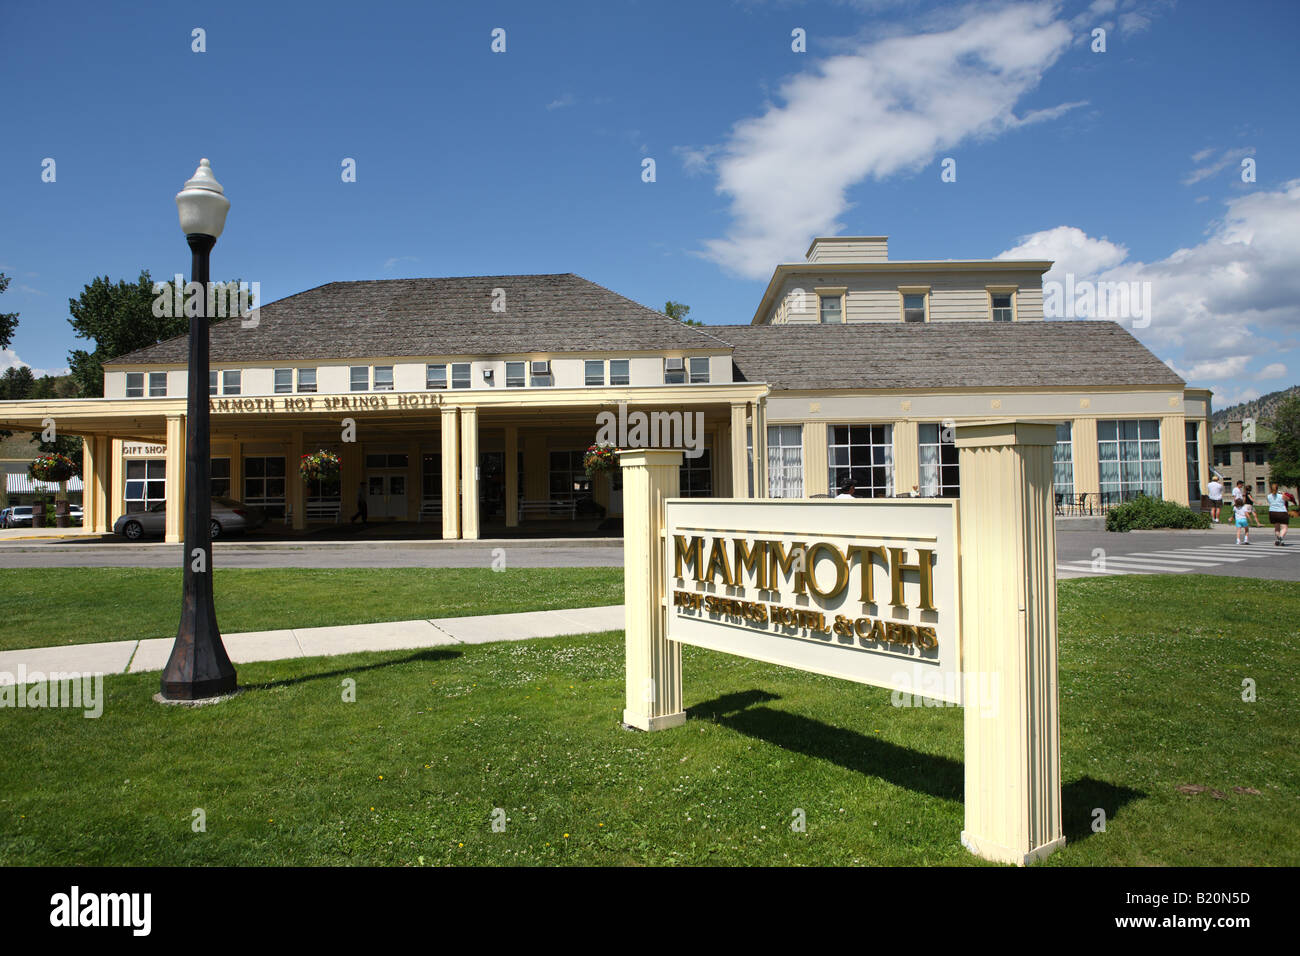 Mammoth Hot Springs Hotel Le Parc National de Yellowstone au Wyoming USA Banque D'Images